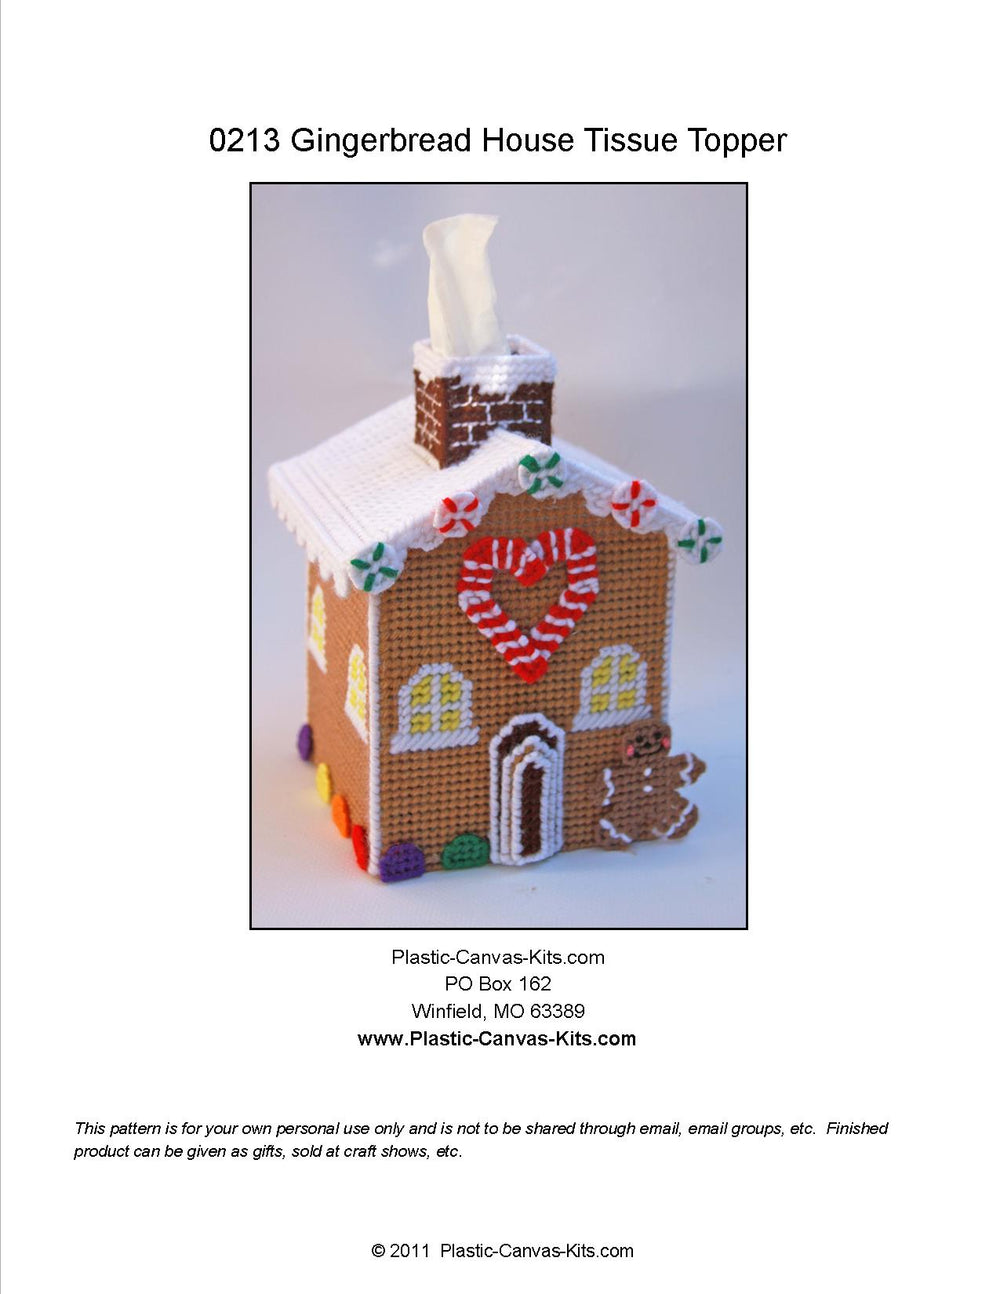 Gingerbread House Tissue Topper